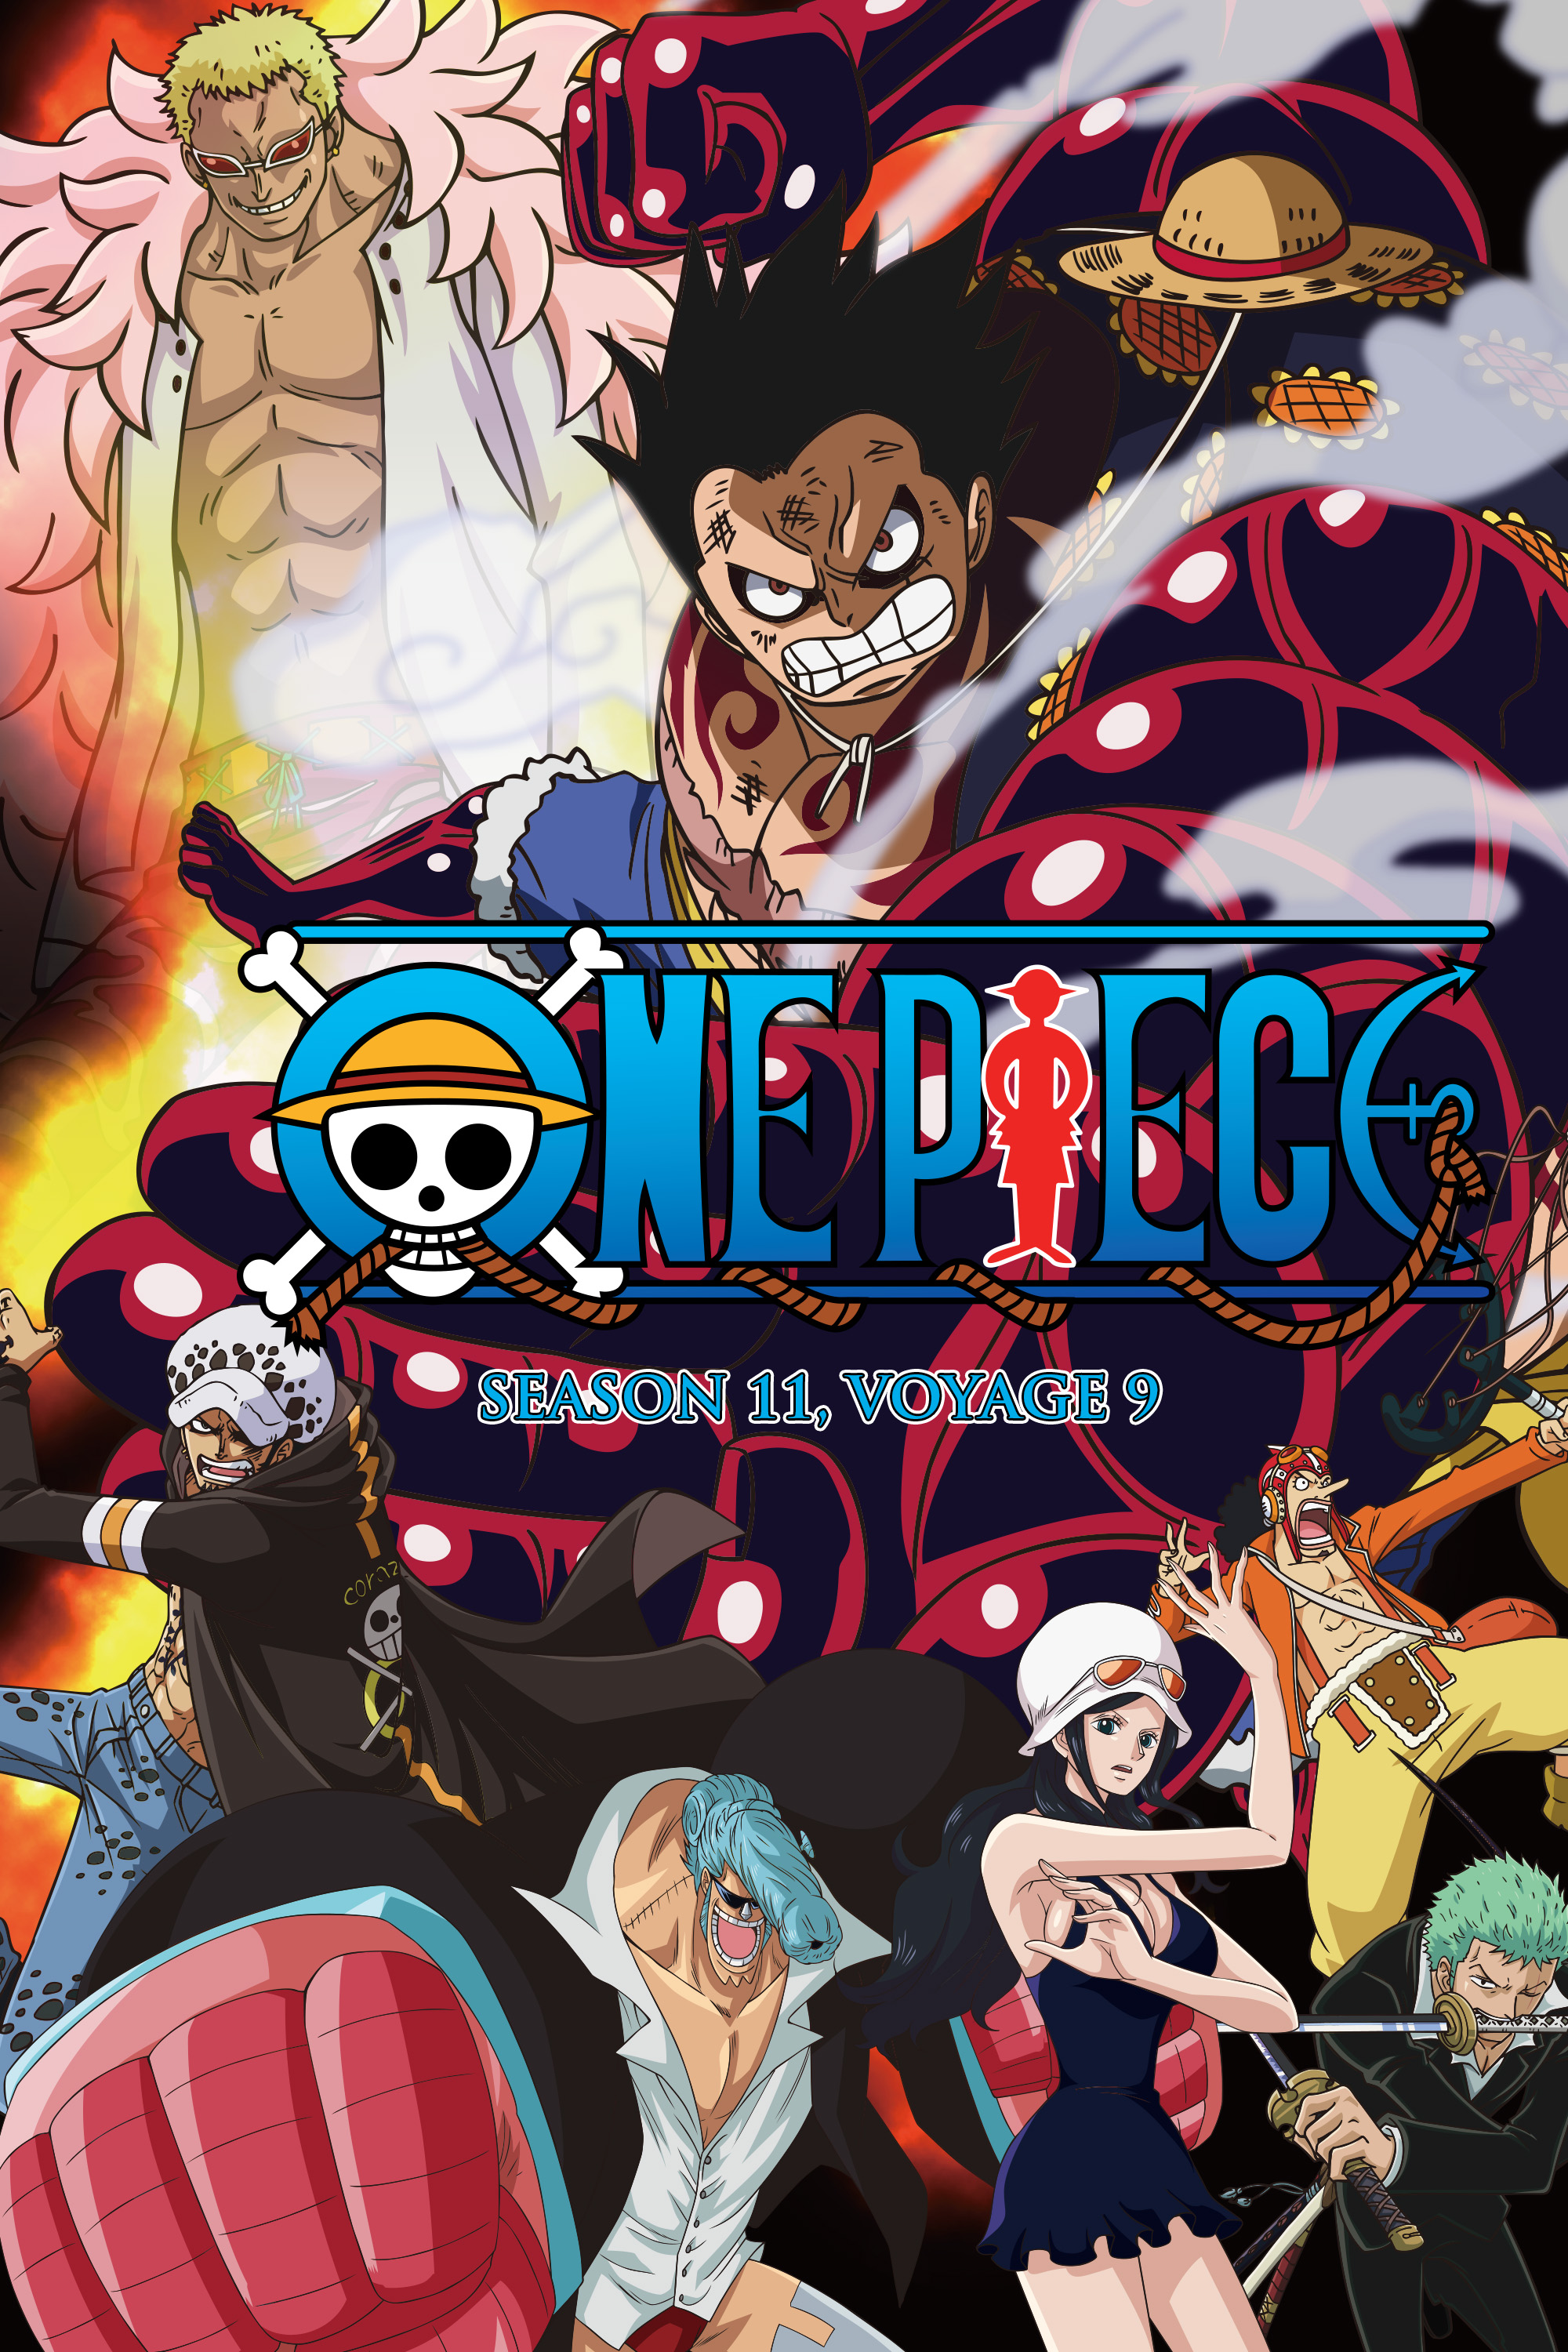 One Piece Witness The End Of The Historic Battle Between Luffy And Doflamingo As The Chapter Of Dressrosa Comes To A Close One Piece Season 11 Voyage 9 Episodes